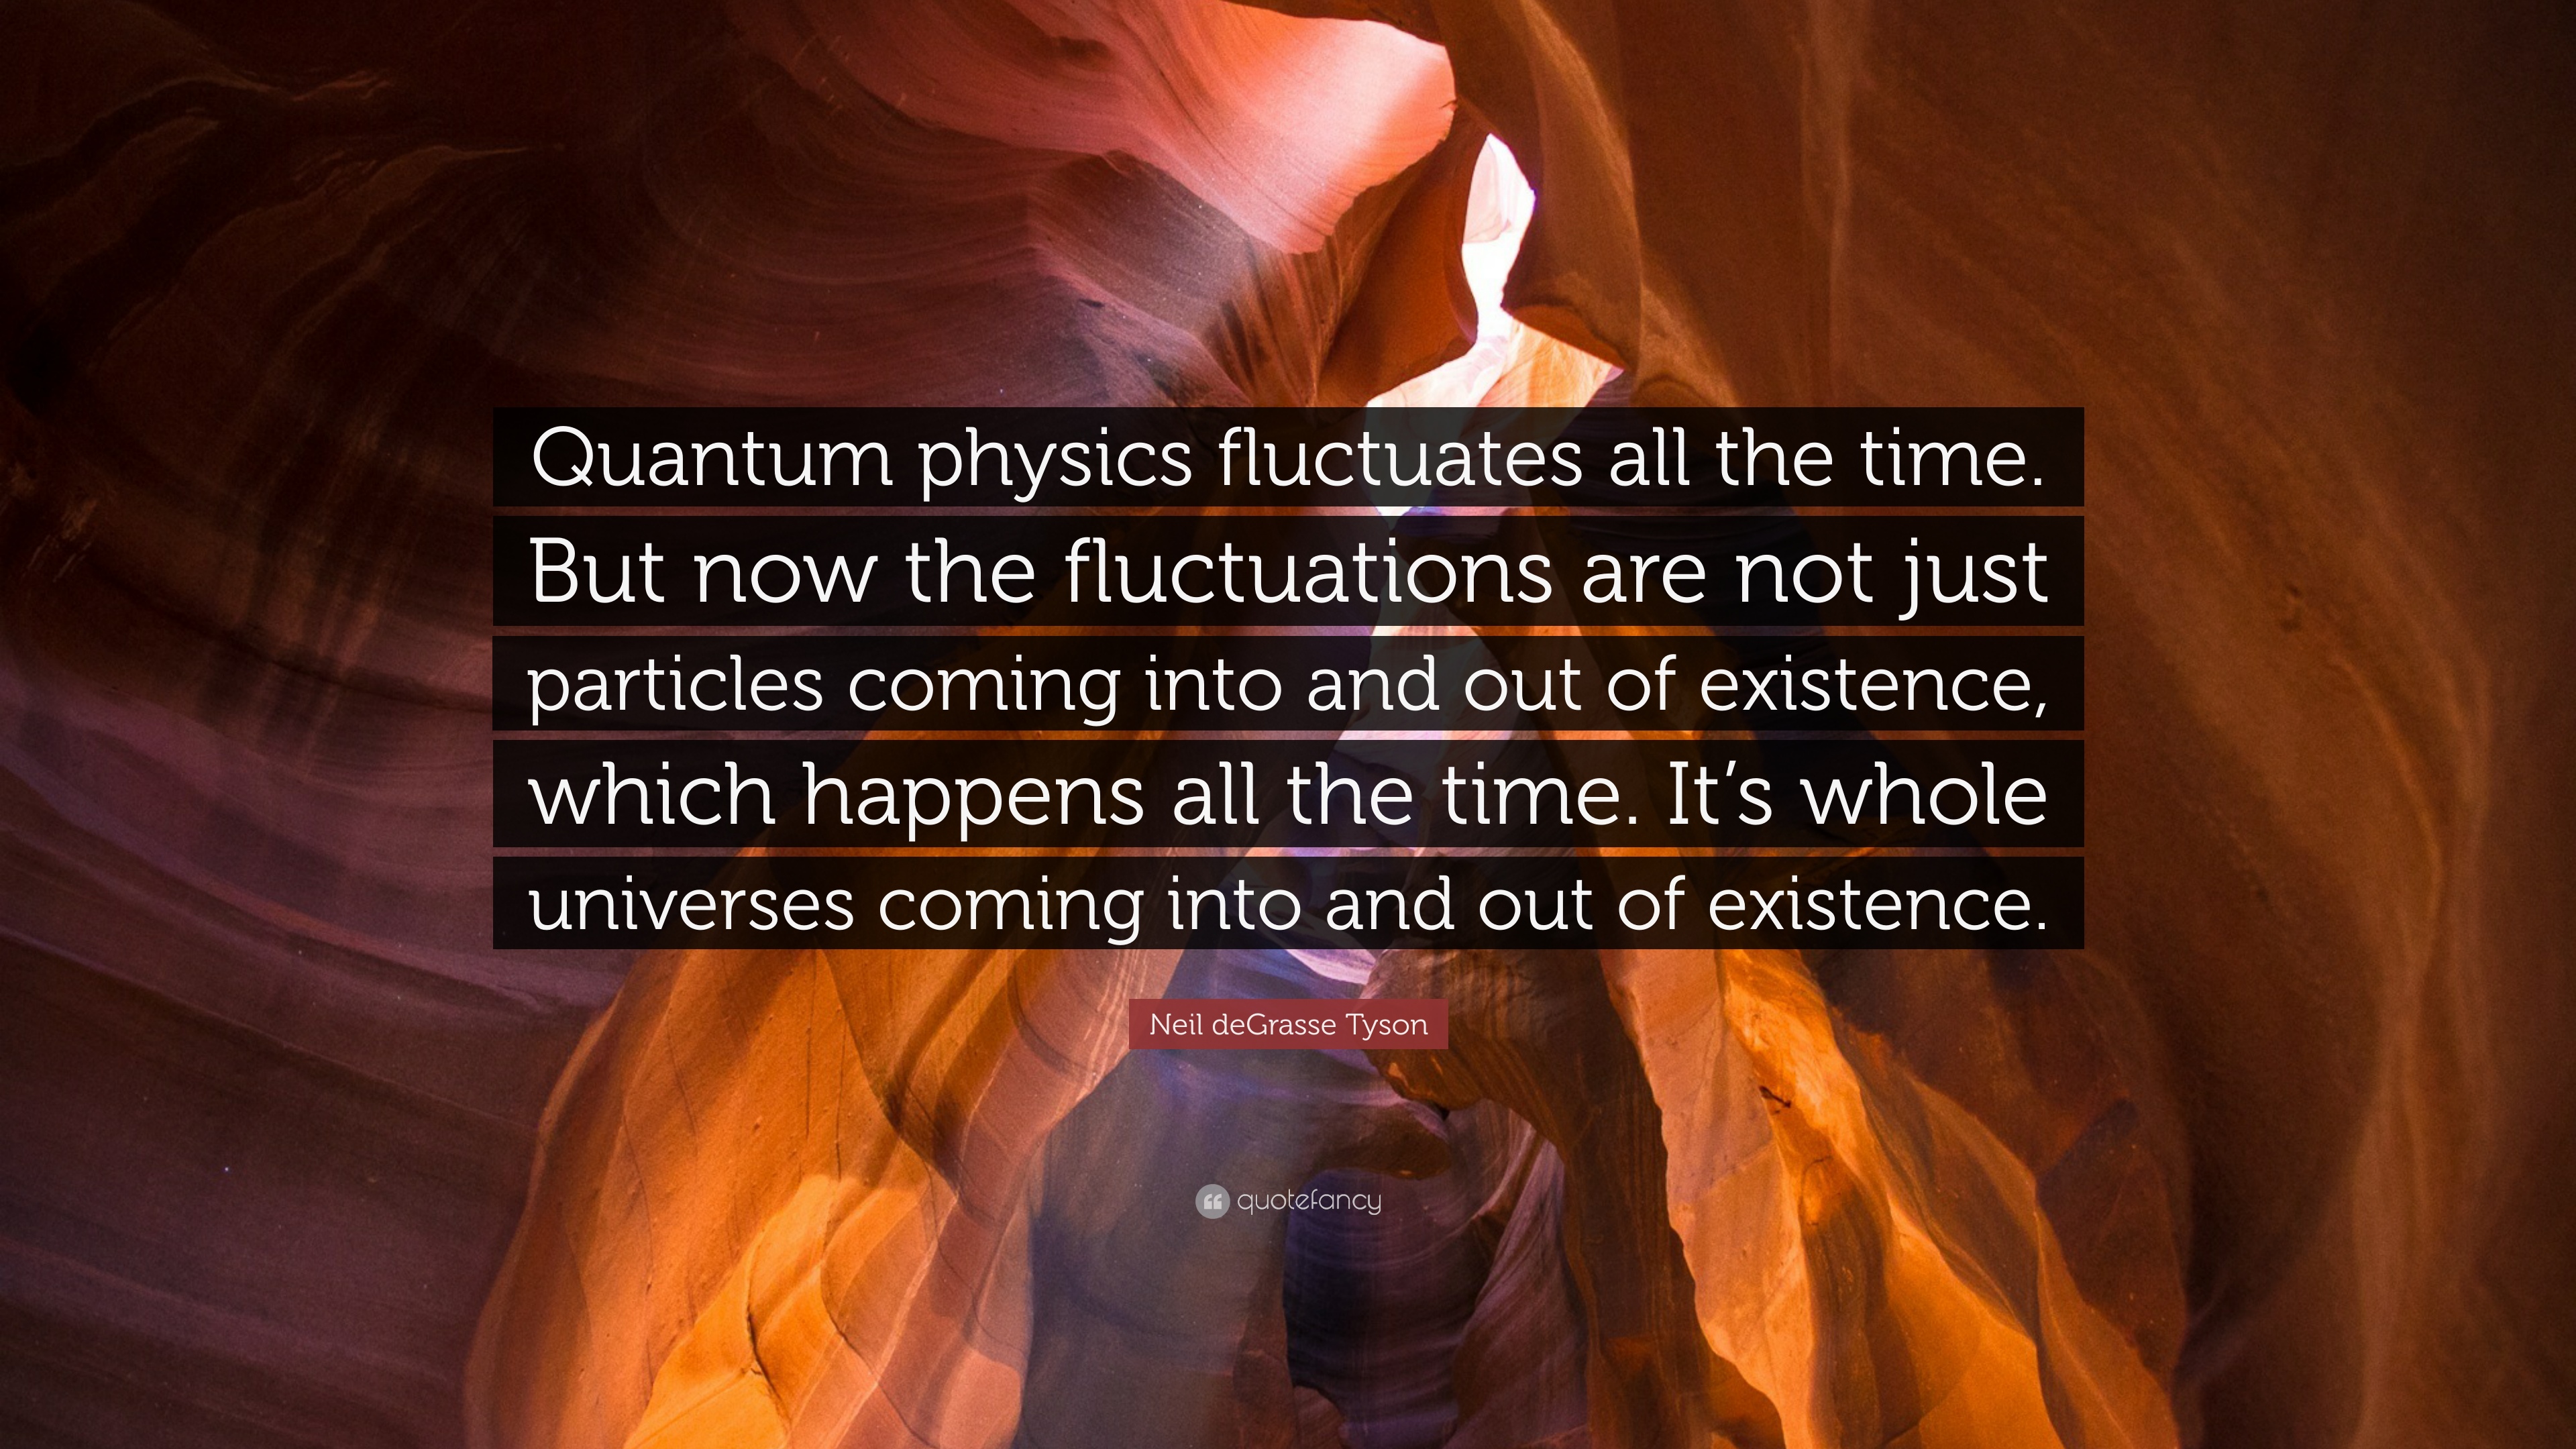 Neil deGrasse Tyson Quote: “Quantum physics fluctuates all the time